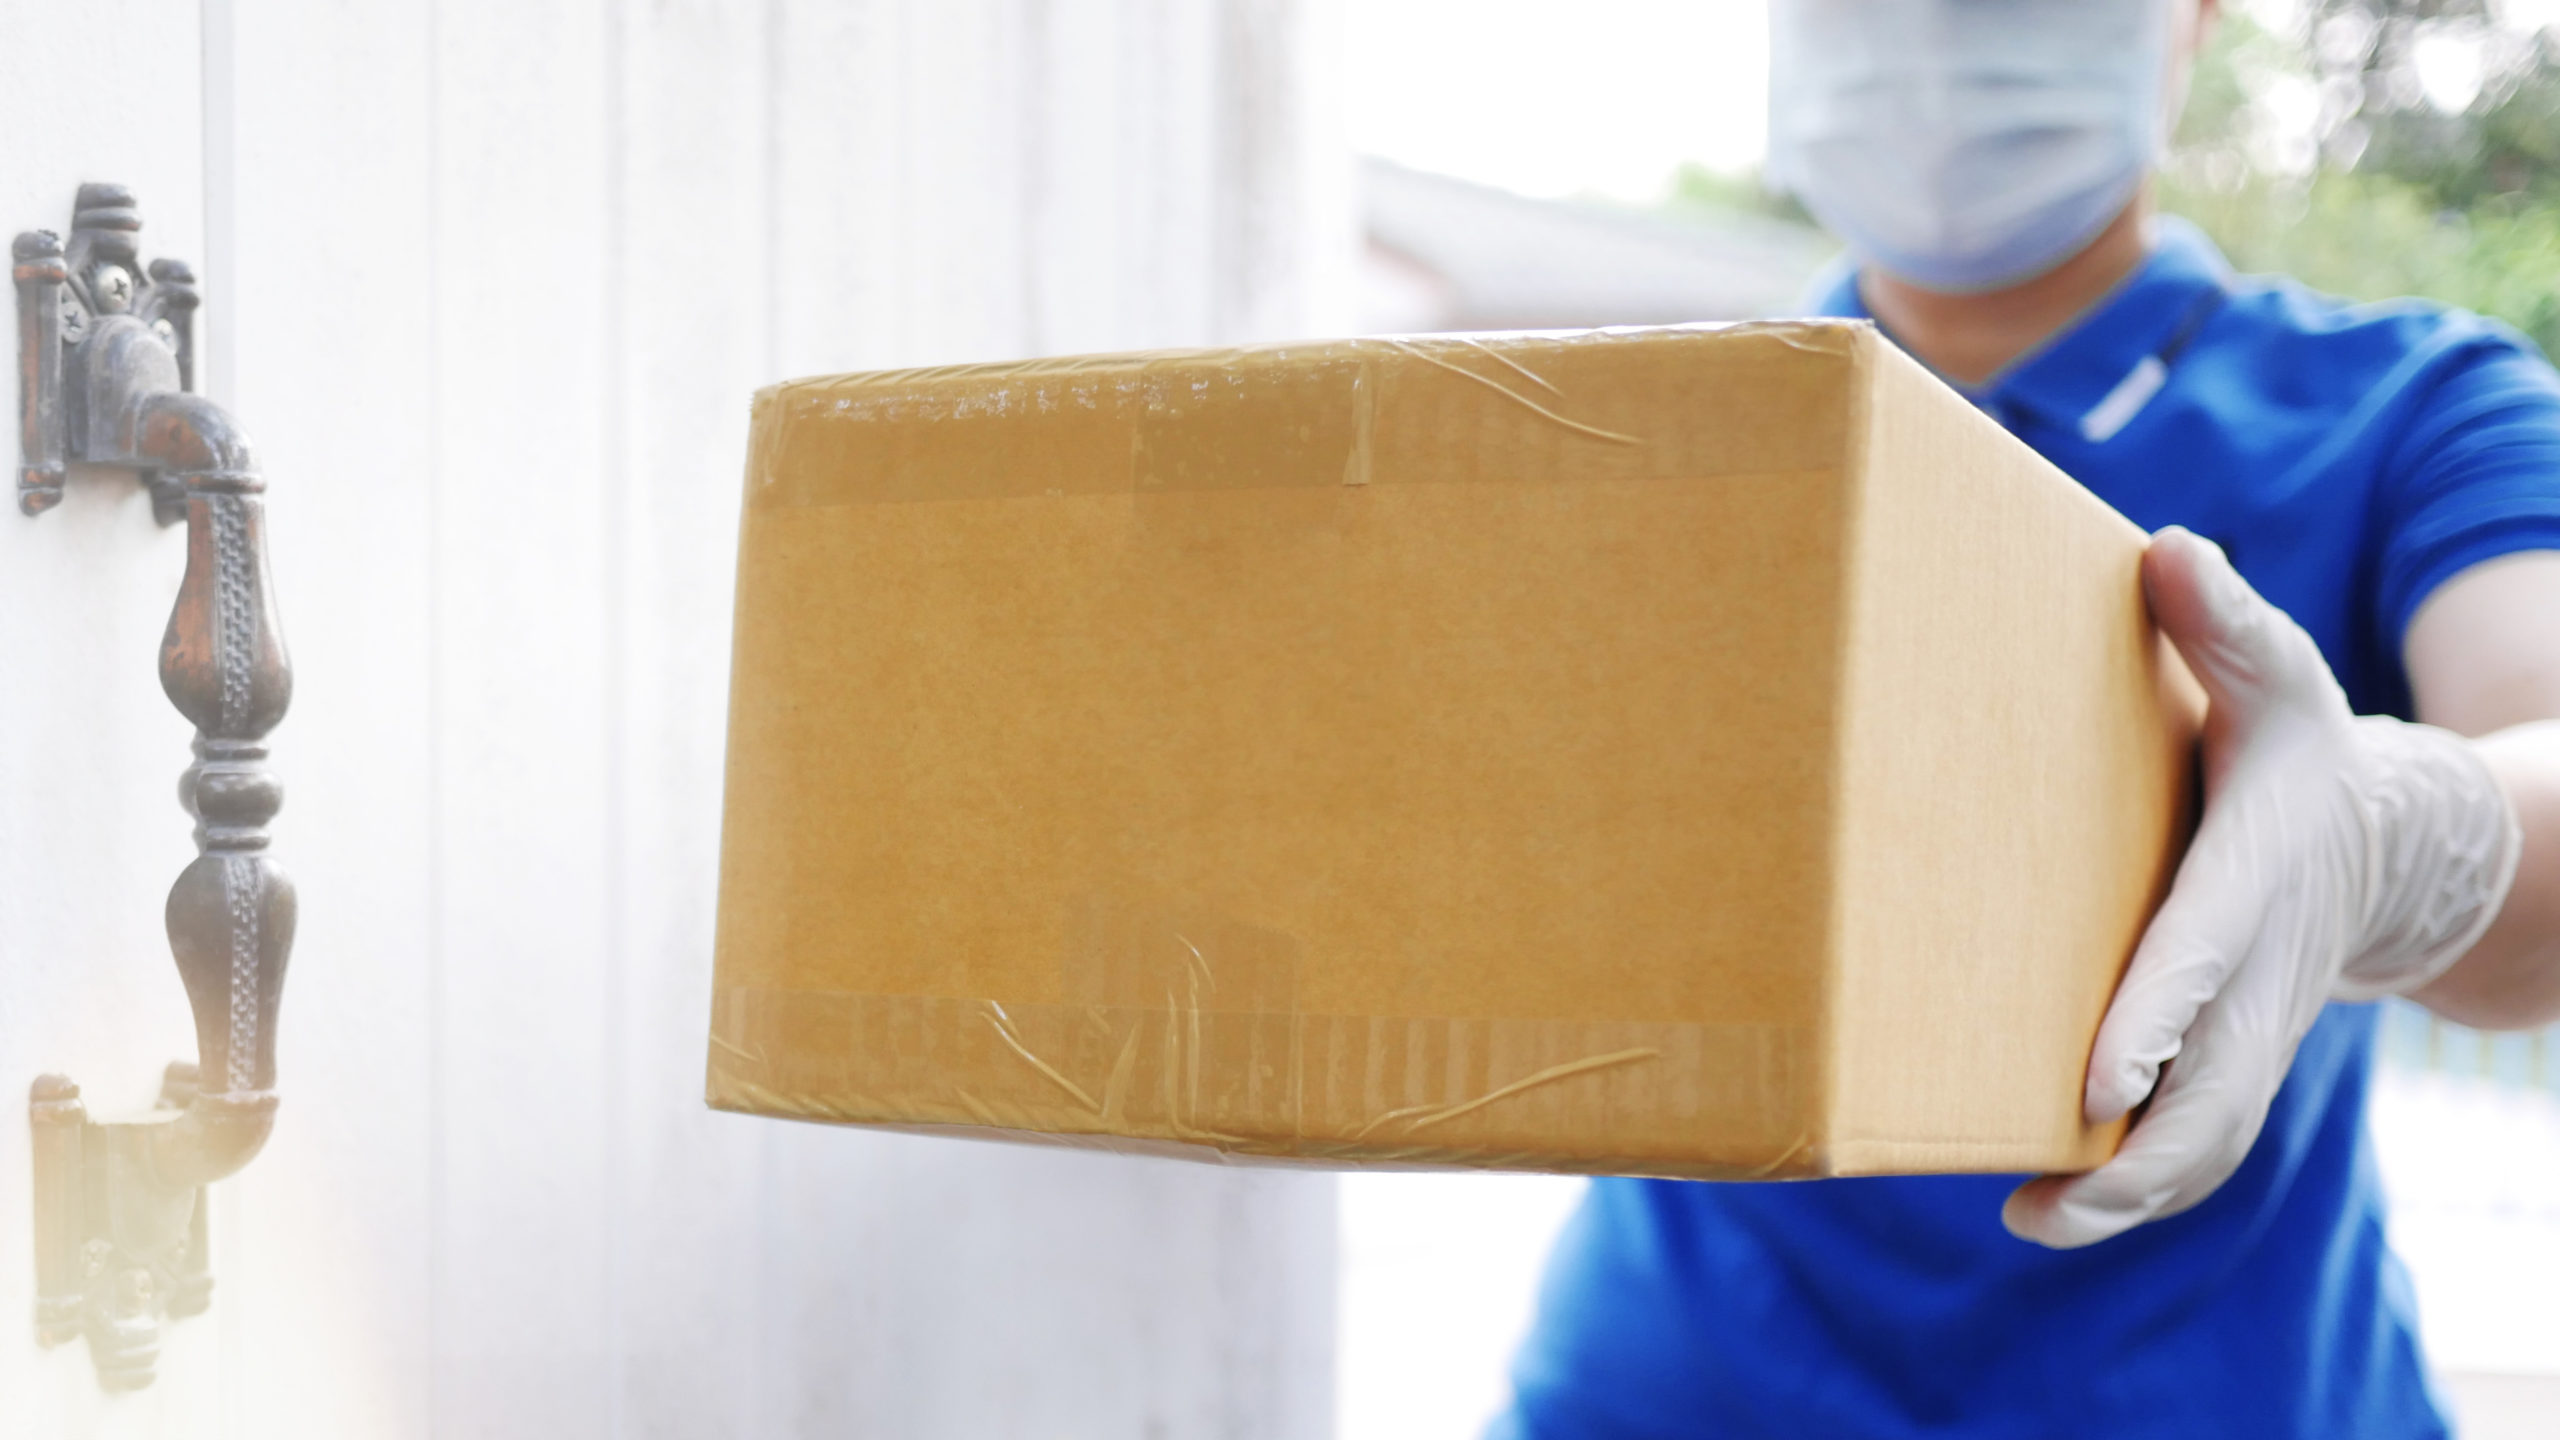 Delivery services courier during the Coronavirus (COVID-19) pandemic, close-up of cardboard box holding by a courier wearing protective face mask and latex gloves at home front door blurred background